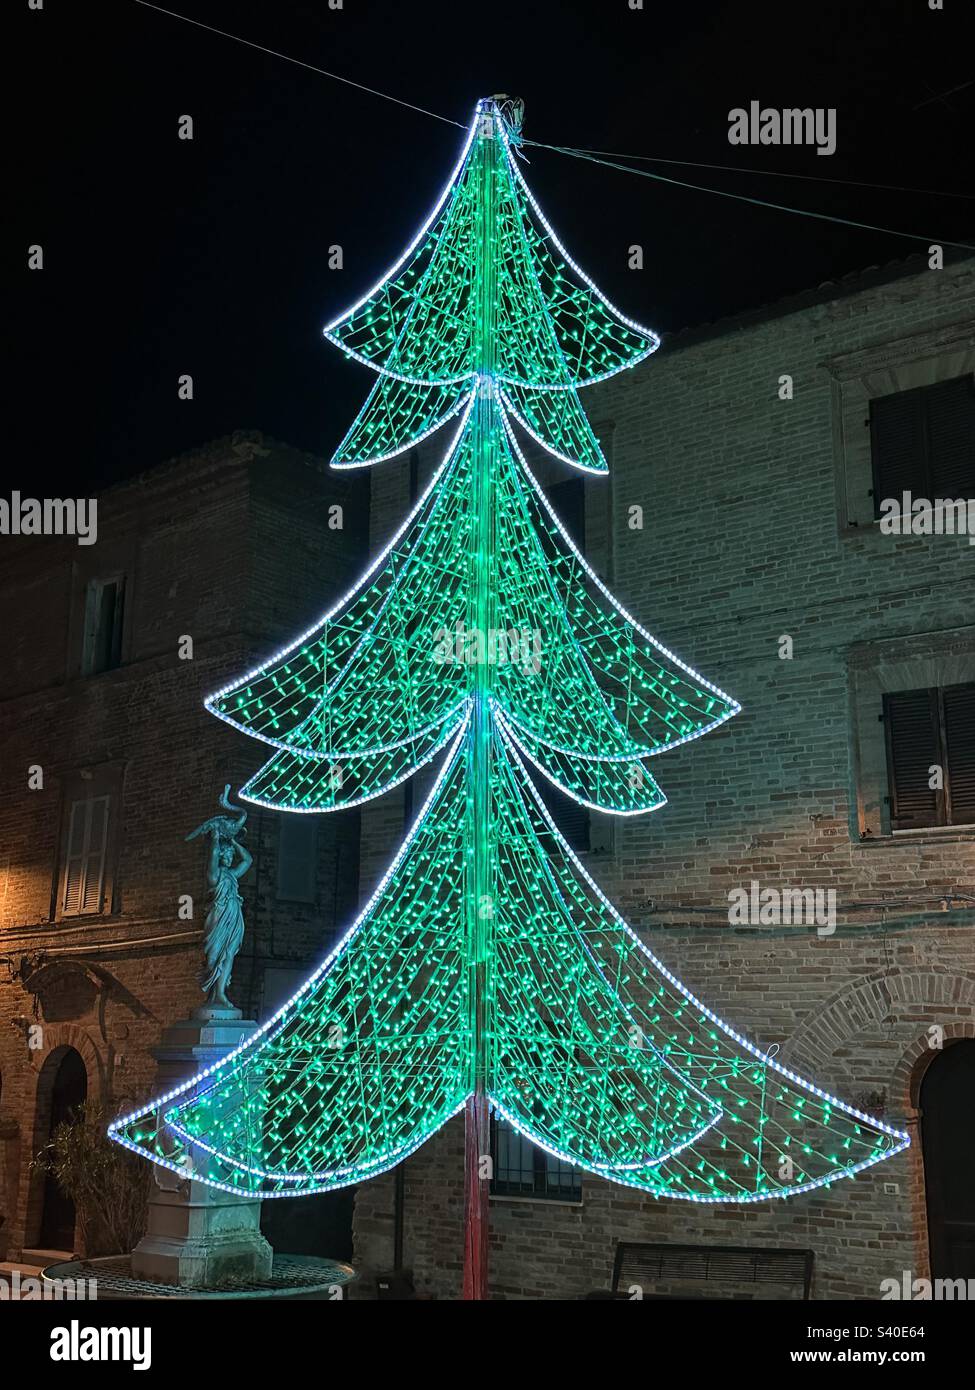 Christmas tree composed with green and white lights Stock Photo